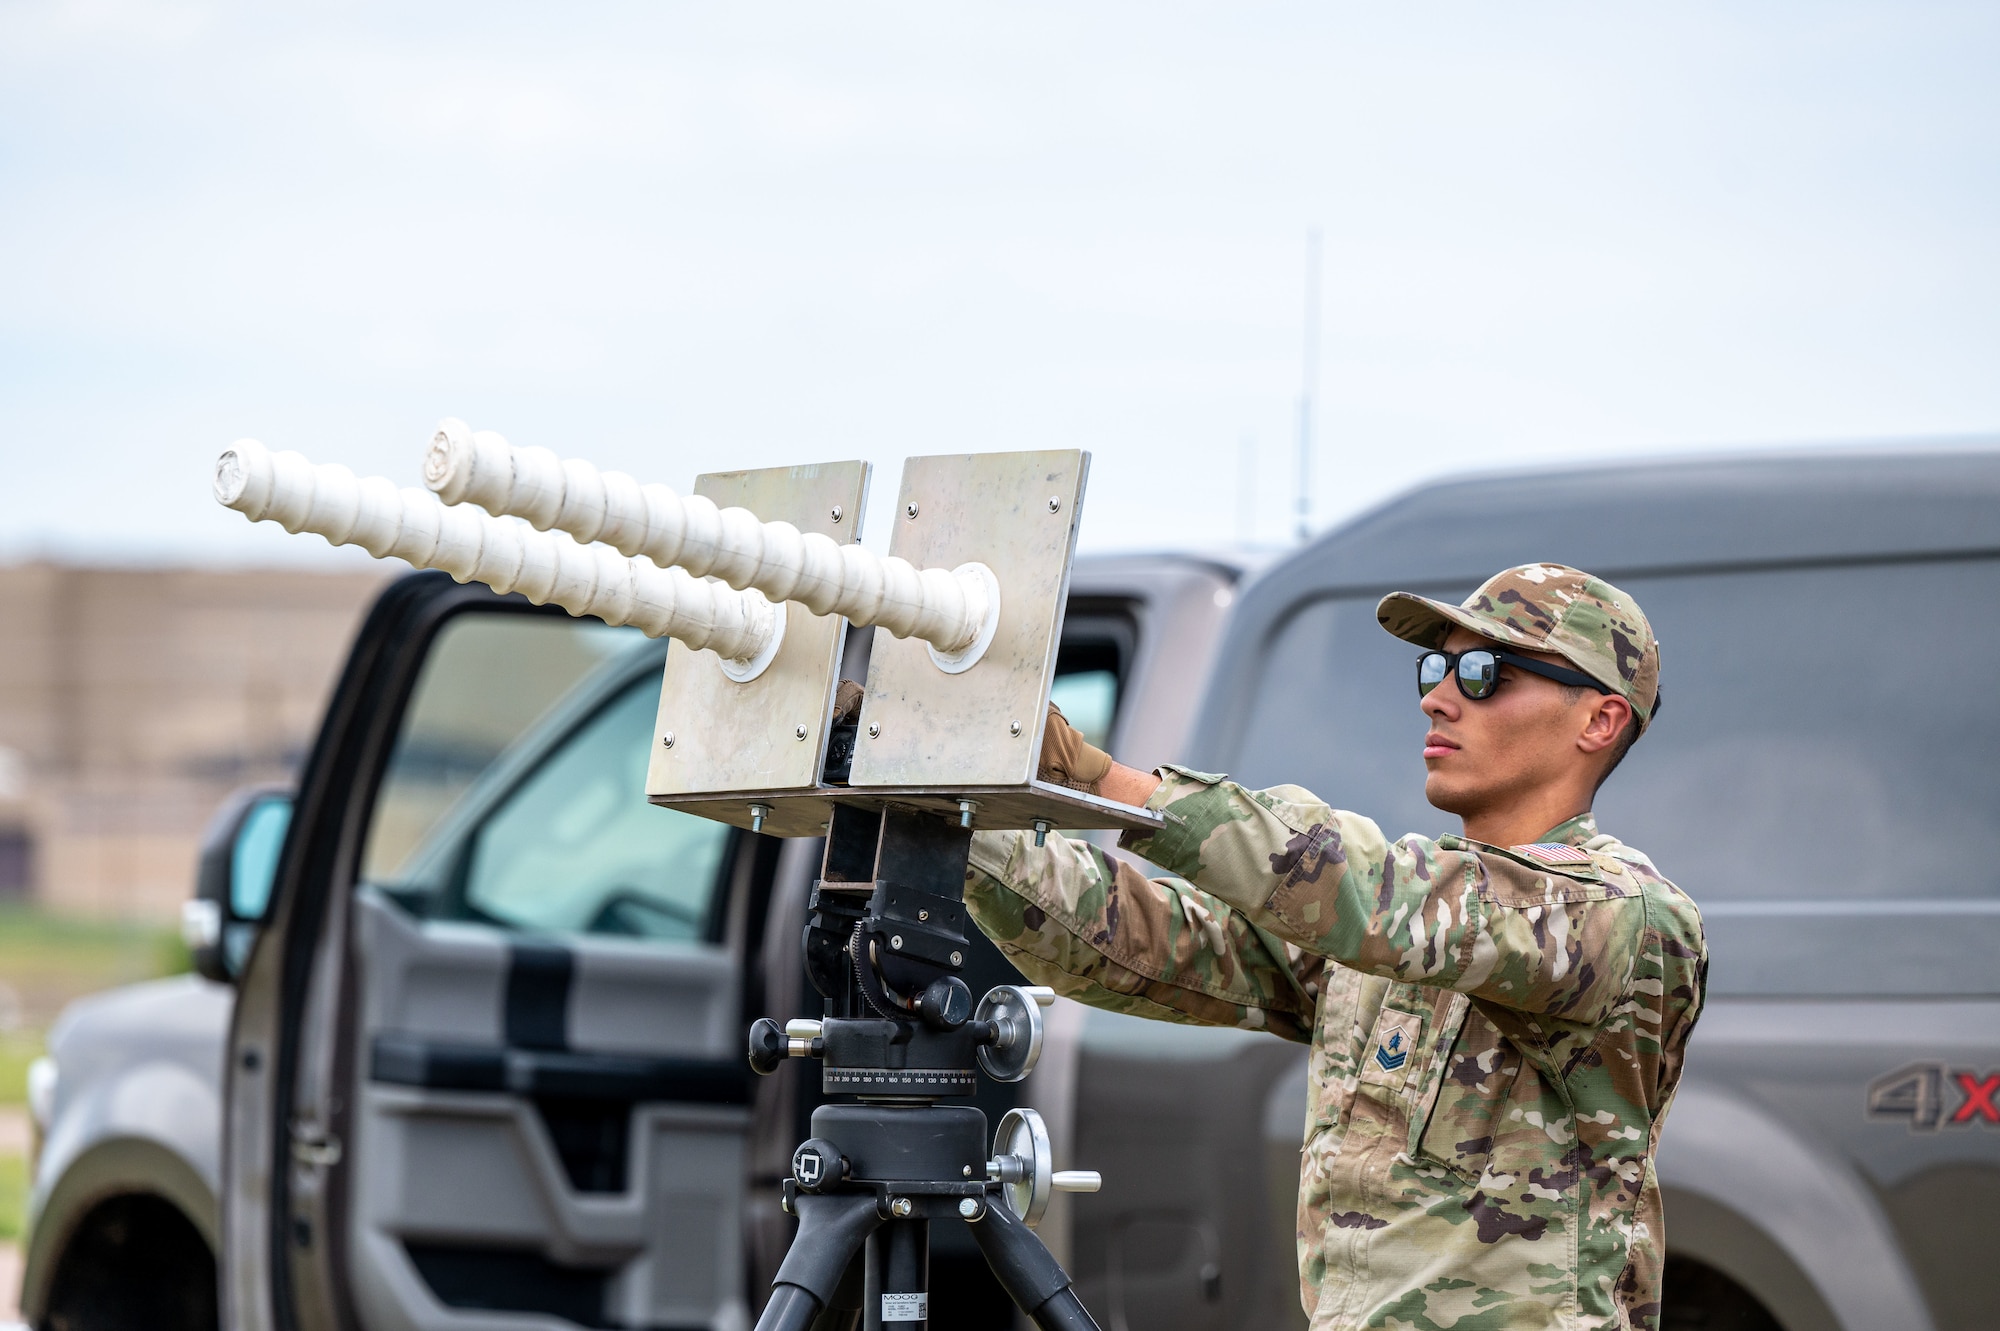 U.S. Space Force Sgt. Jonathan Ojeda, 527th Space Aggressor Squadron (SAS), conducts Global Positioning System (GPS) electromagnetic interference training with a GPS electromagnetic attack system at Schriever Space Force Base, Colorado, July 18, 2023. The 527th SAS’s mission is to know, teach, and replicate modern, emerging, and integrated space threats in order to prepare service, joint, and coalition forces to fight in and through a Contested, Degraded, and Operationally-limited (CDO) environment. (U.S. Space Force photo by Ethan Johnson)